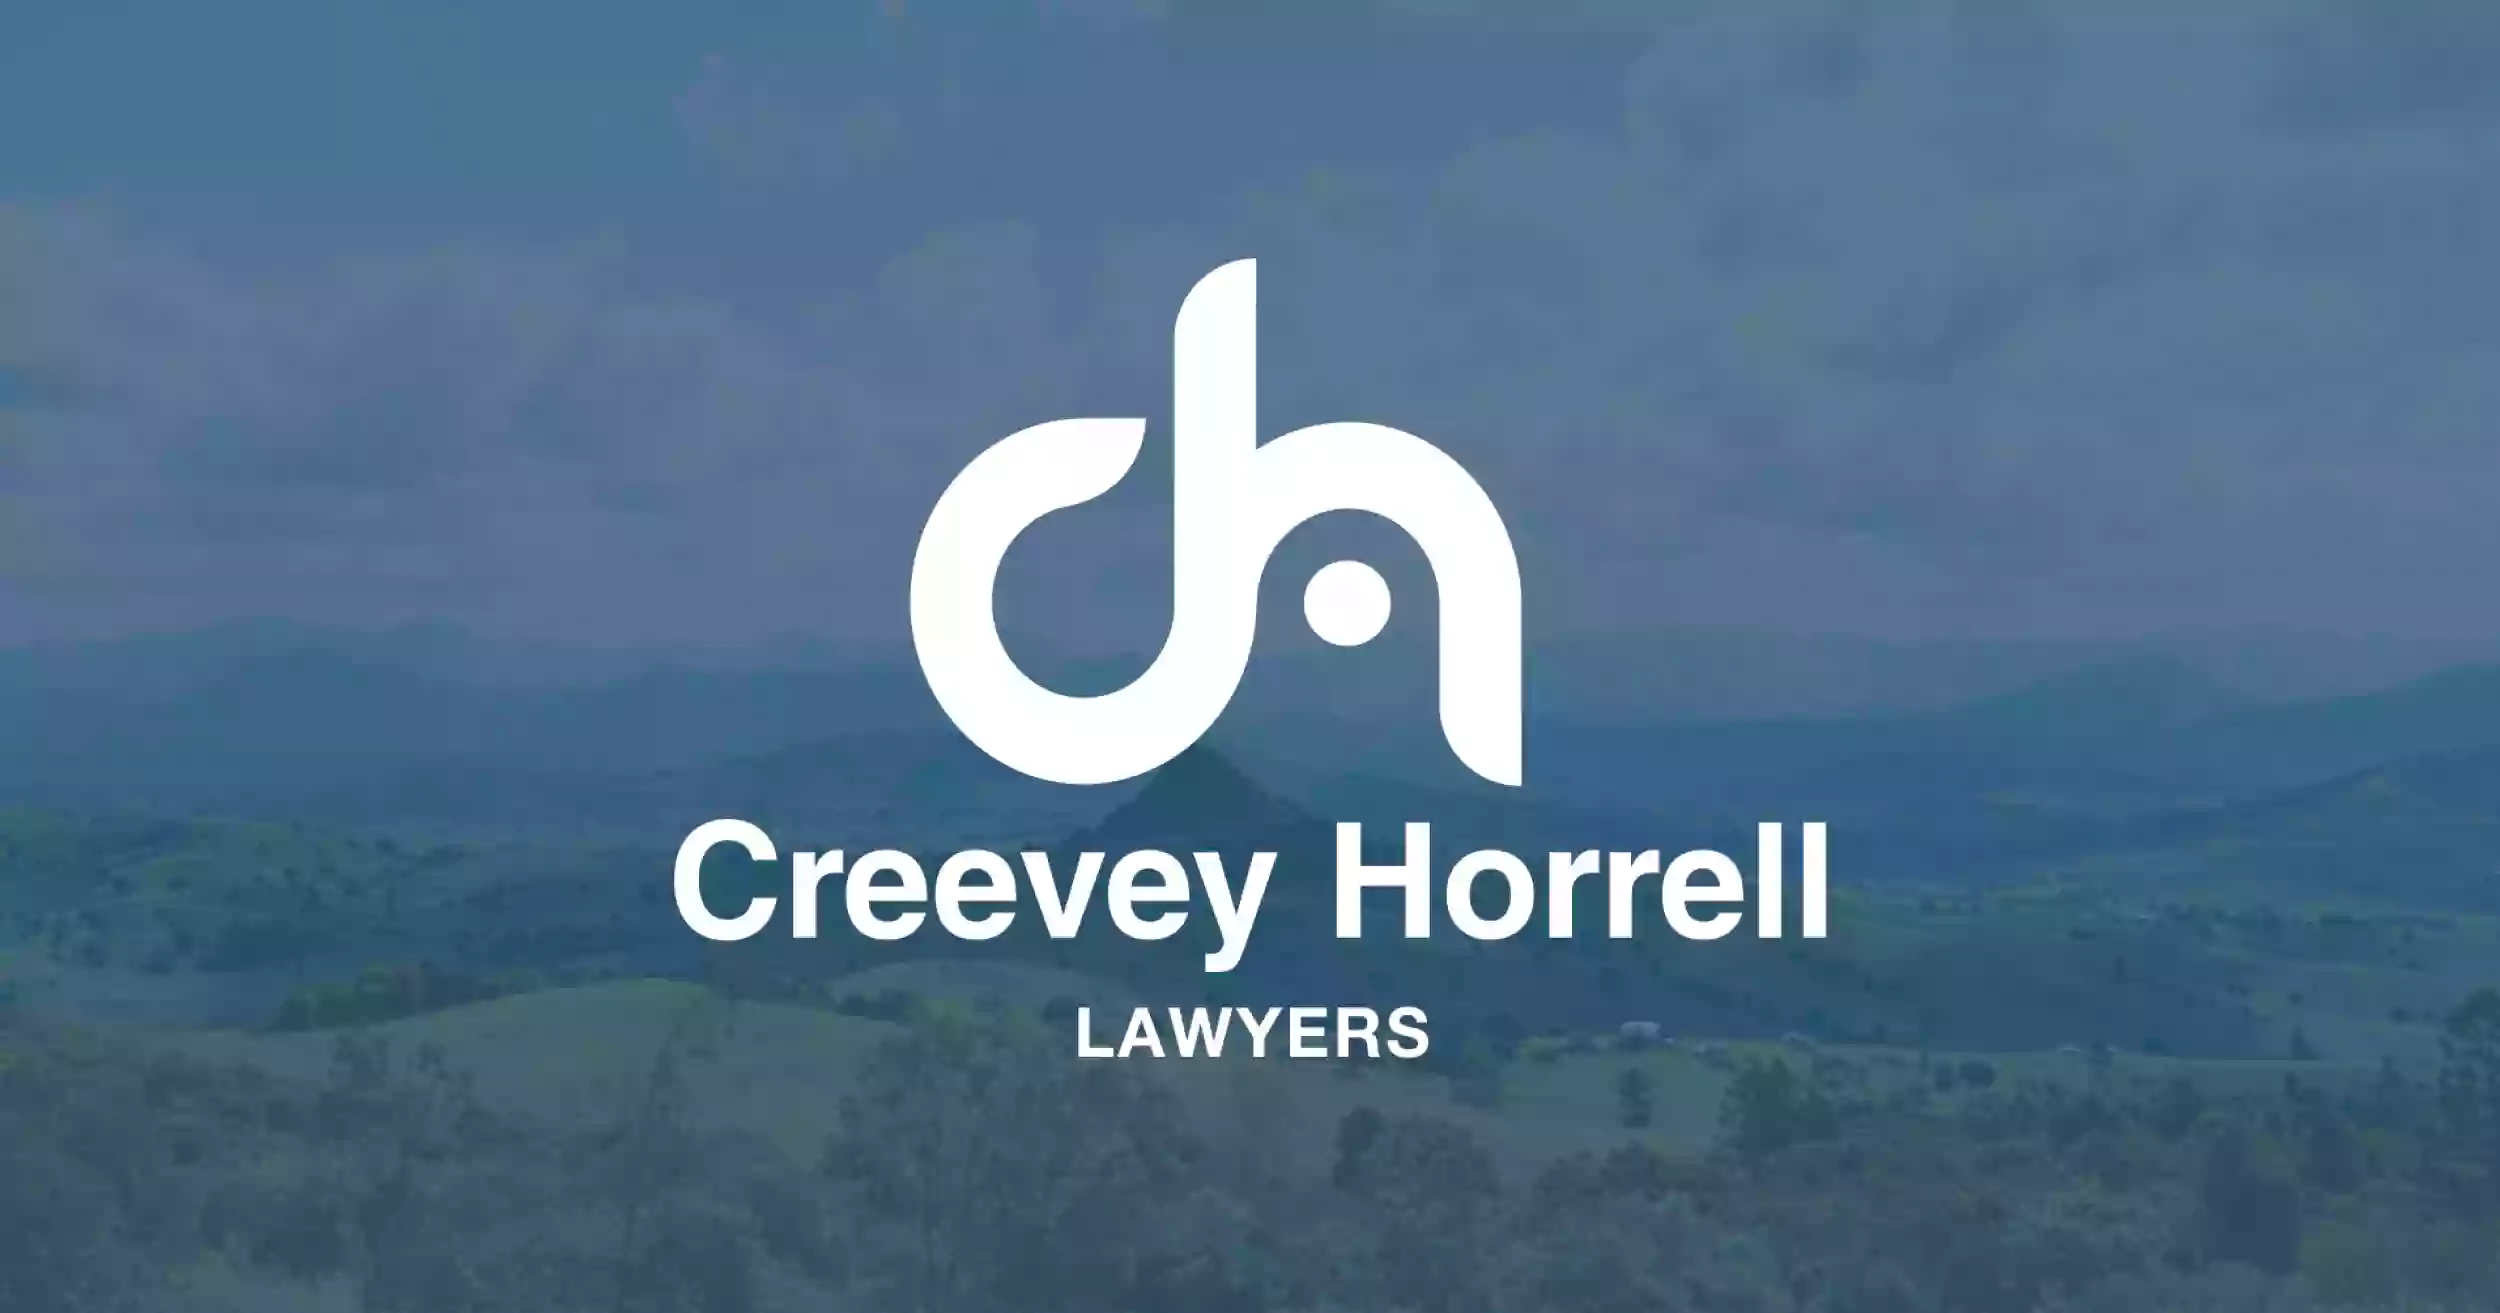 Creevey Horrell Lawyers